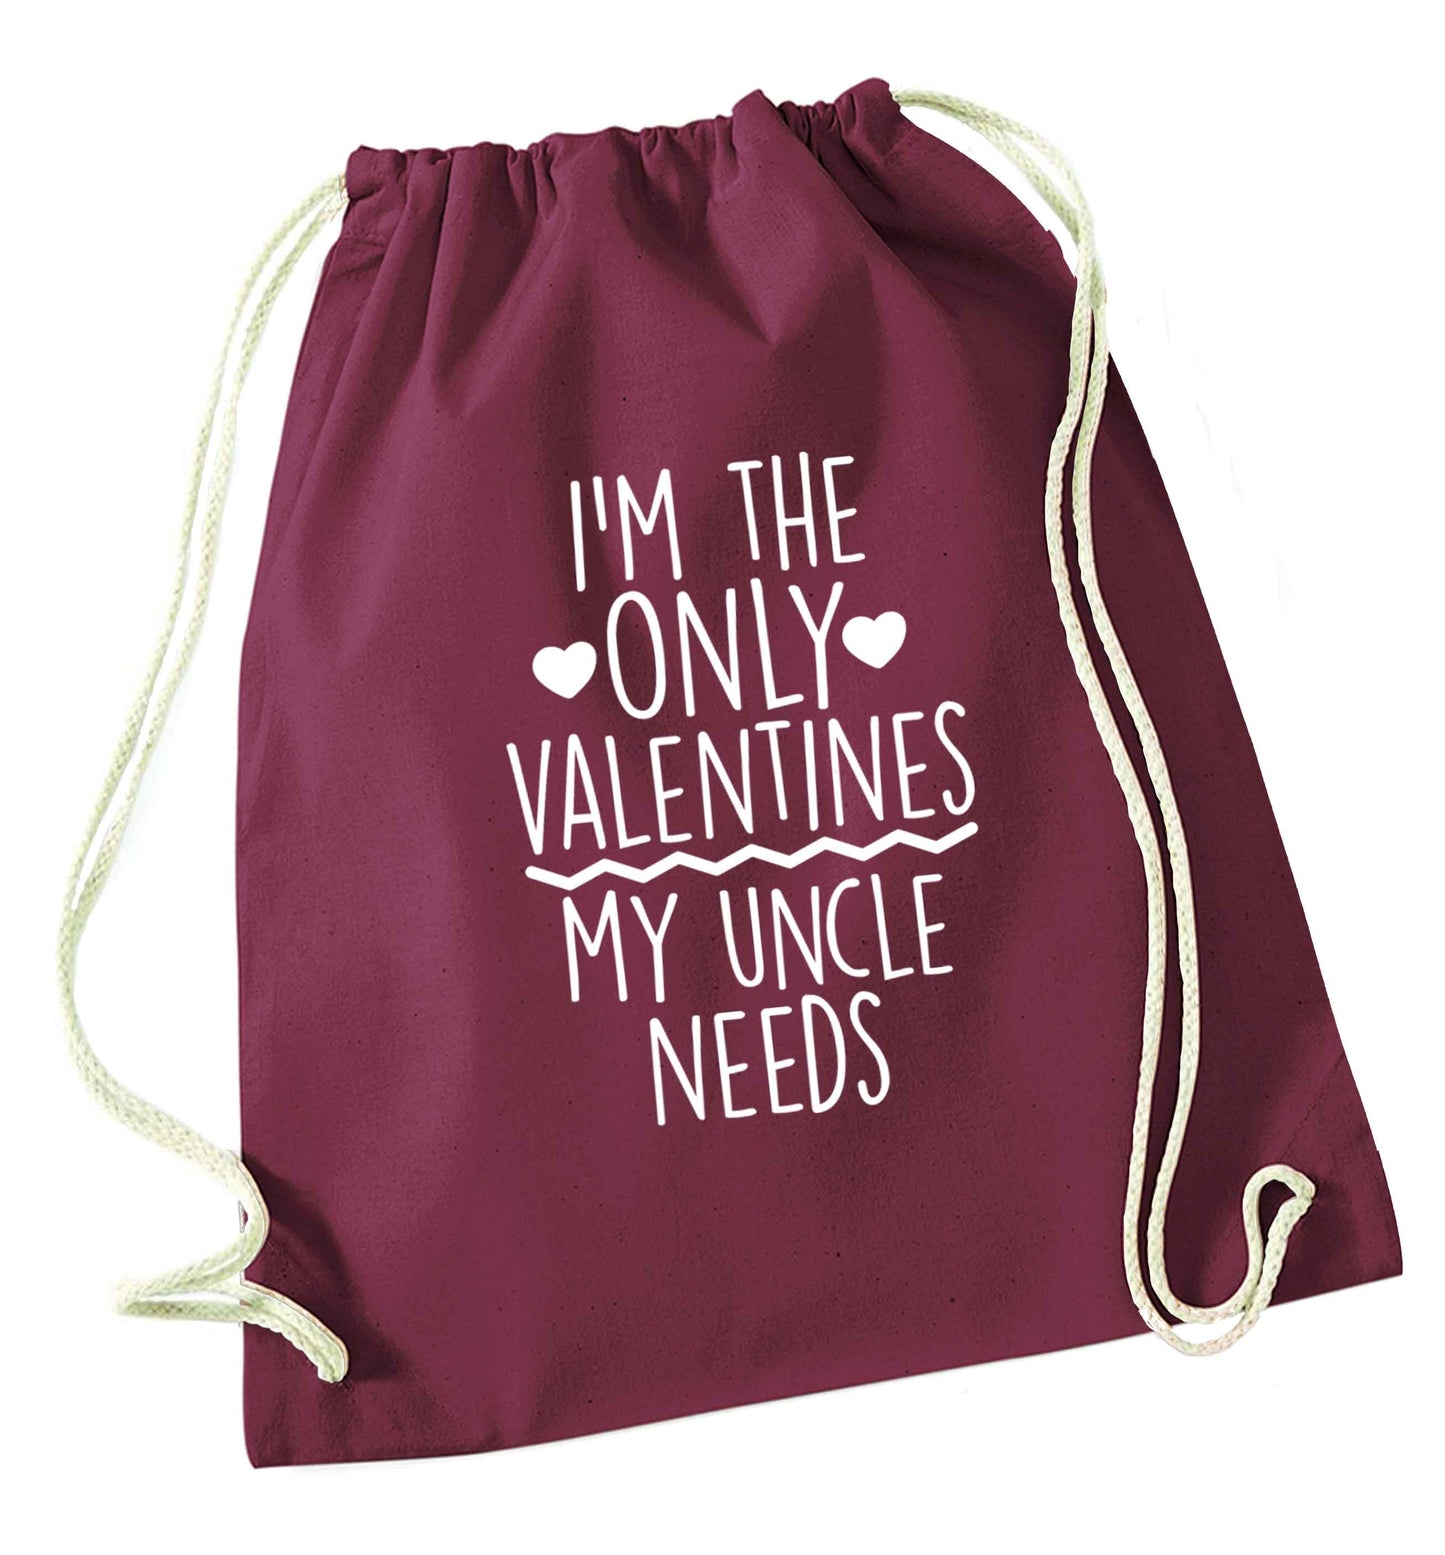 I'm the only valentines my uncle needs maroon drawstring bag